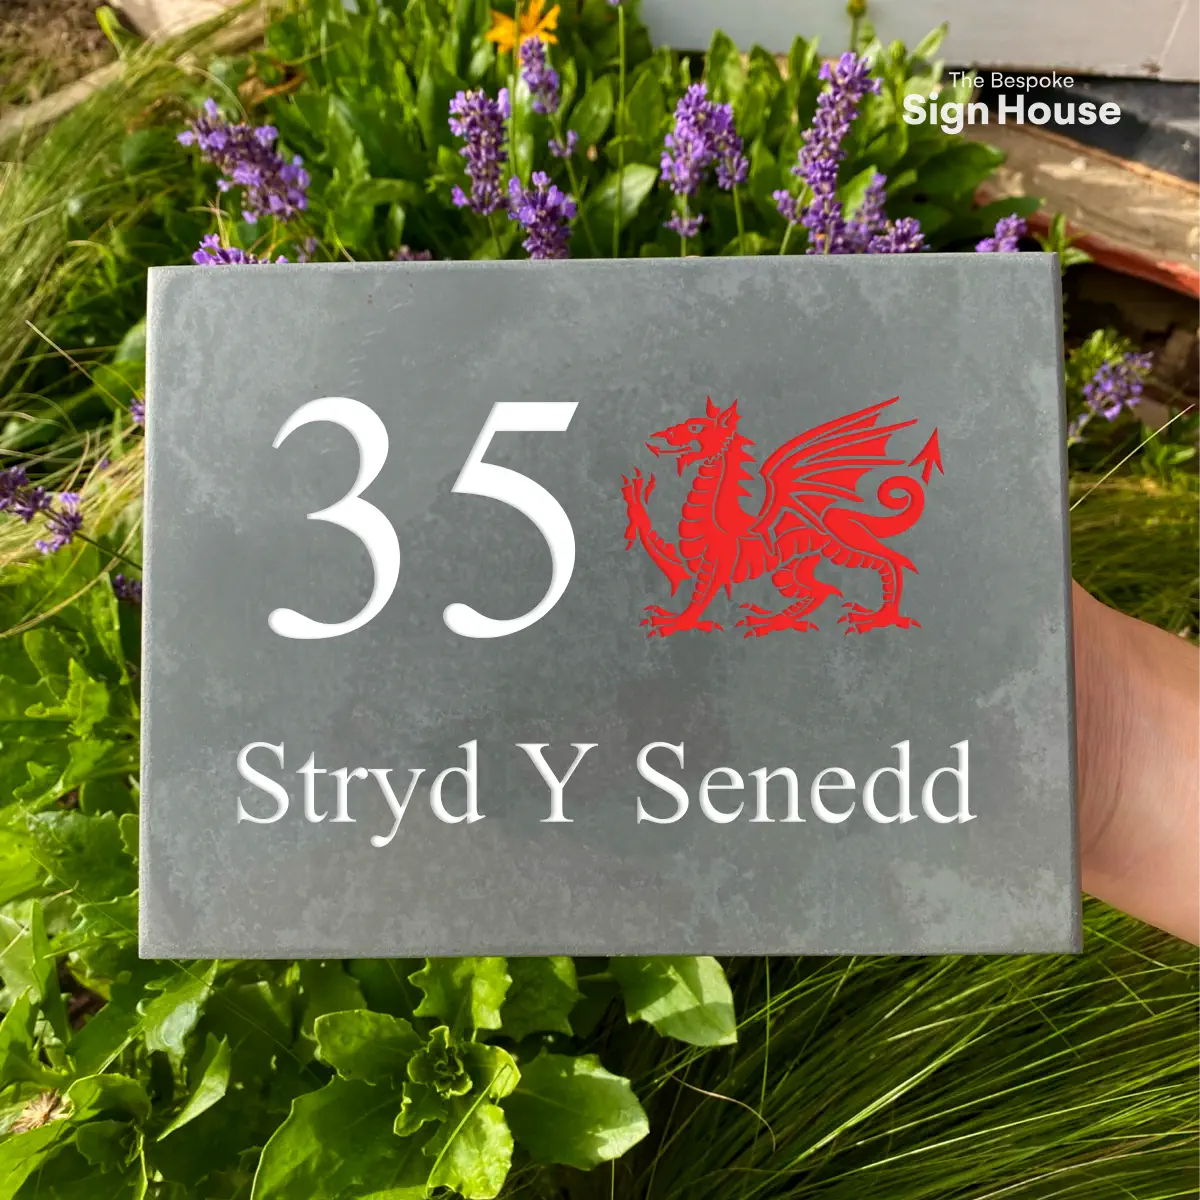 slate house sign with house number, street name and red welsh dragon. The backdrop is of green and purple flowers